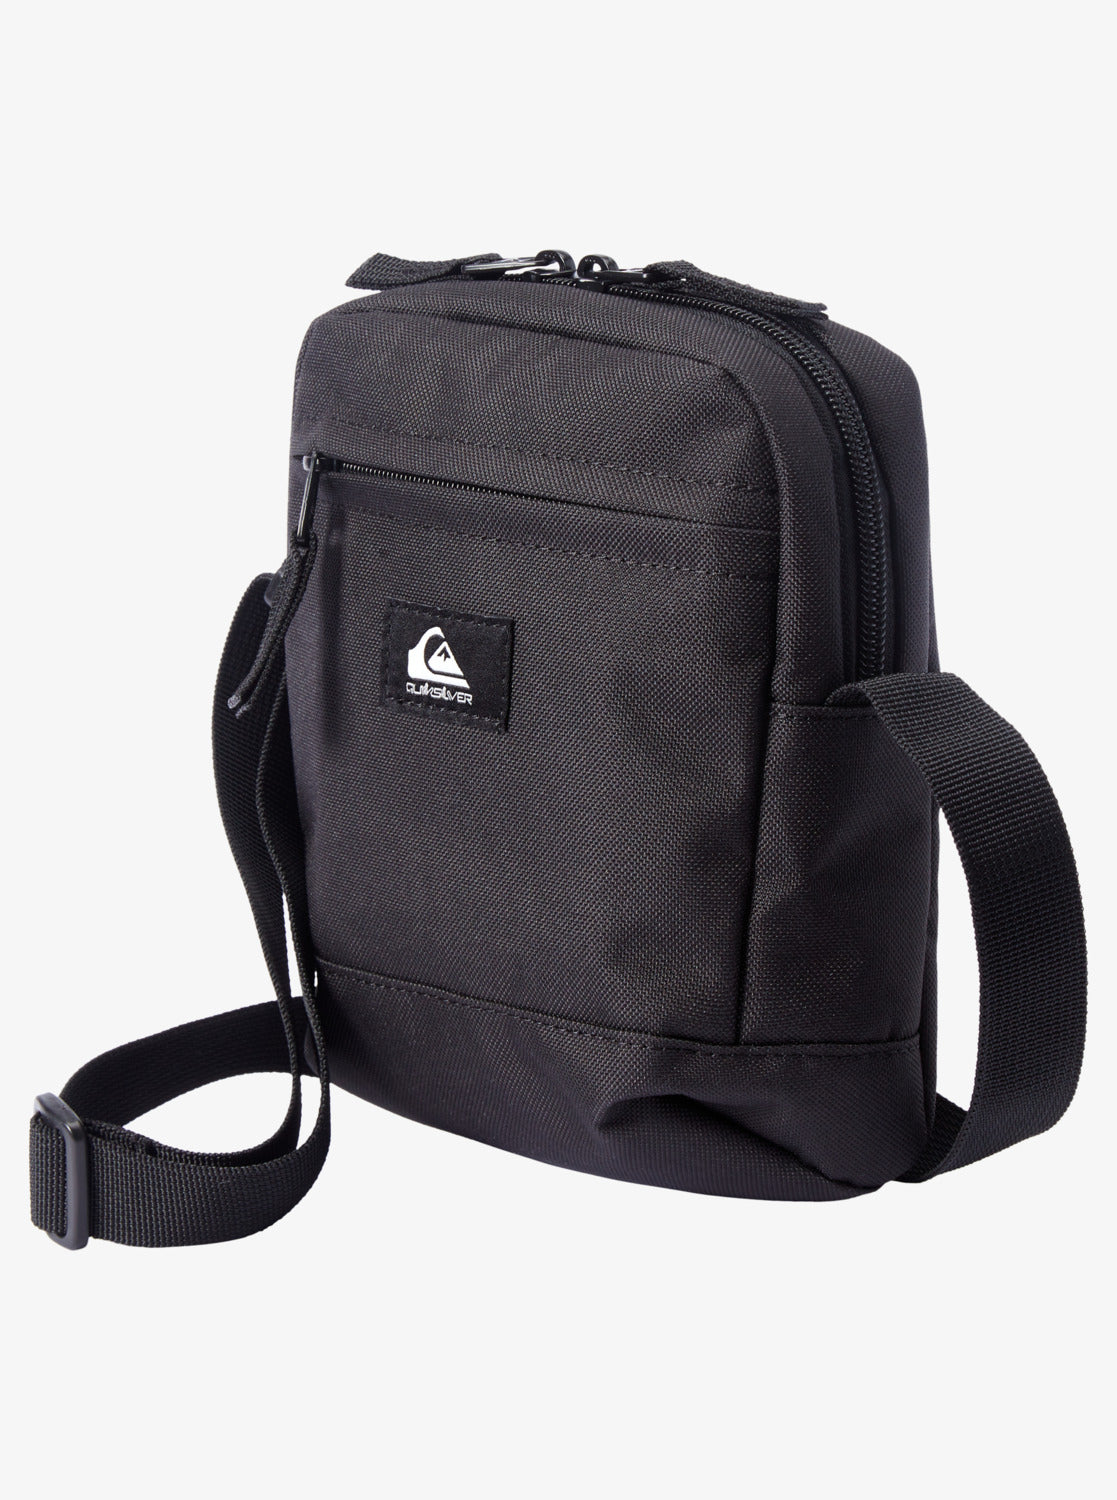 Quiksilver Magicall Small Shoulder Bag in Black